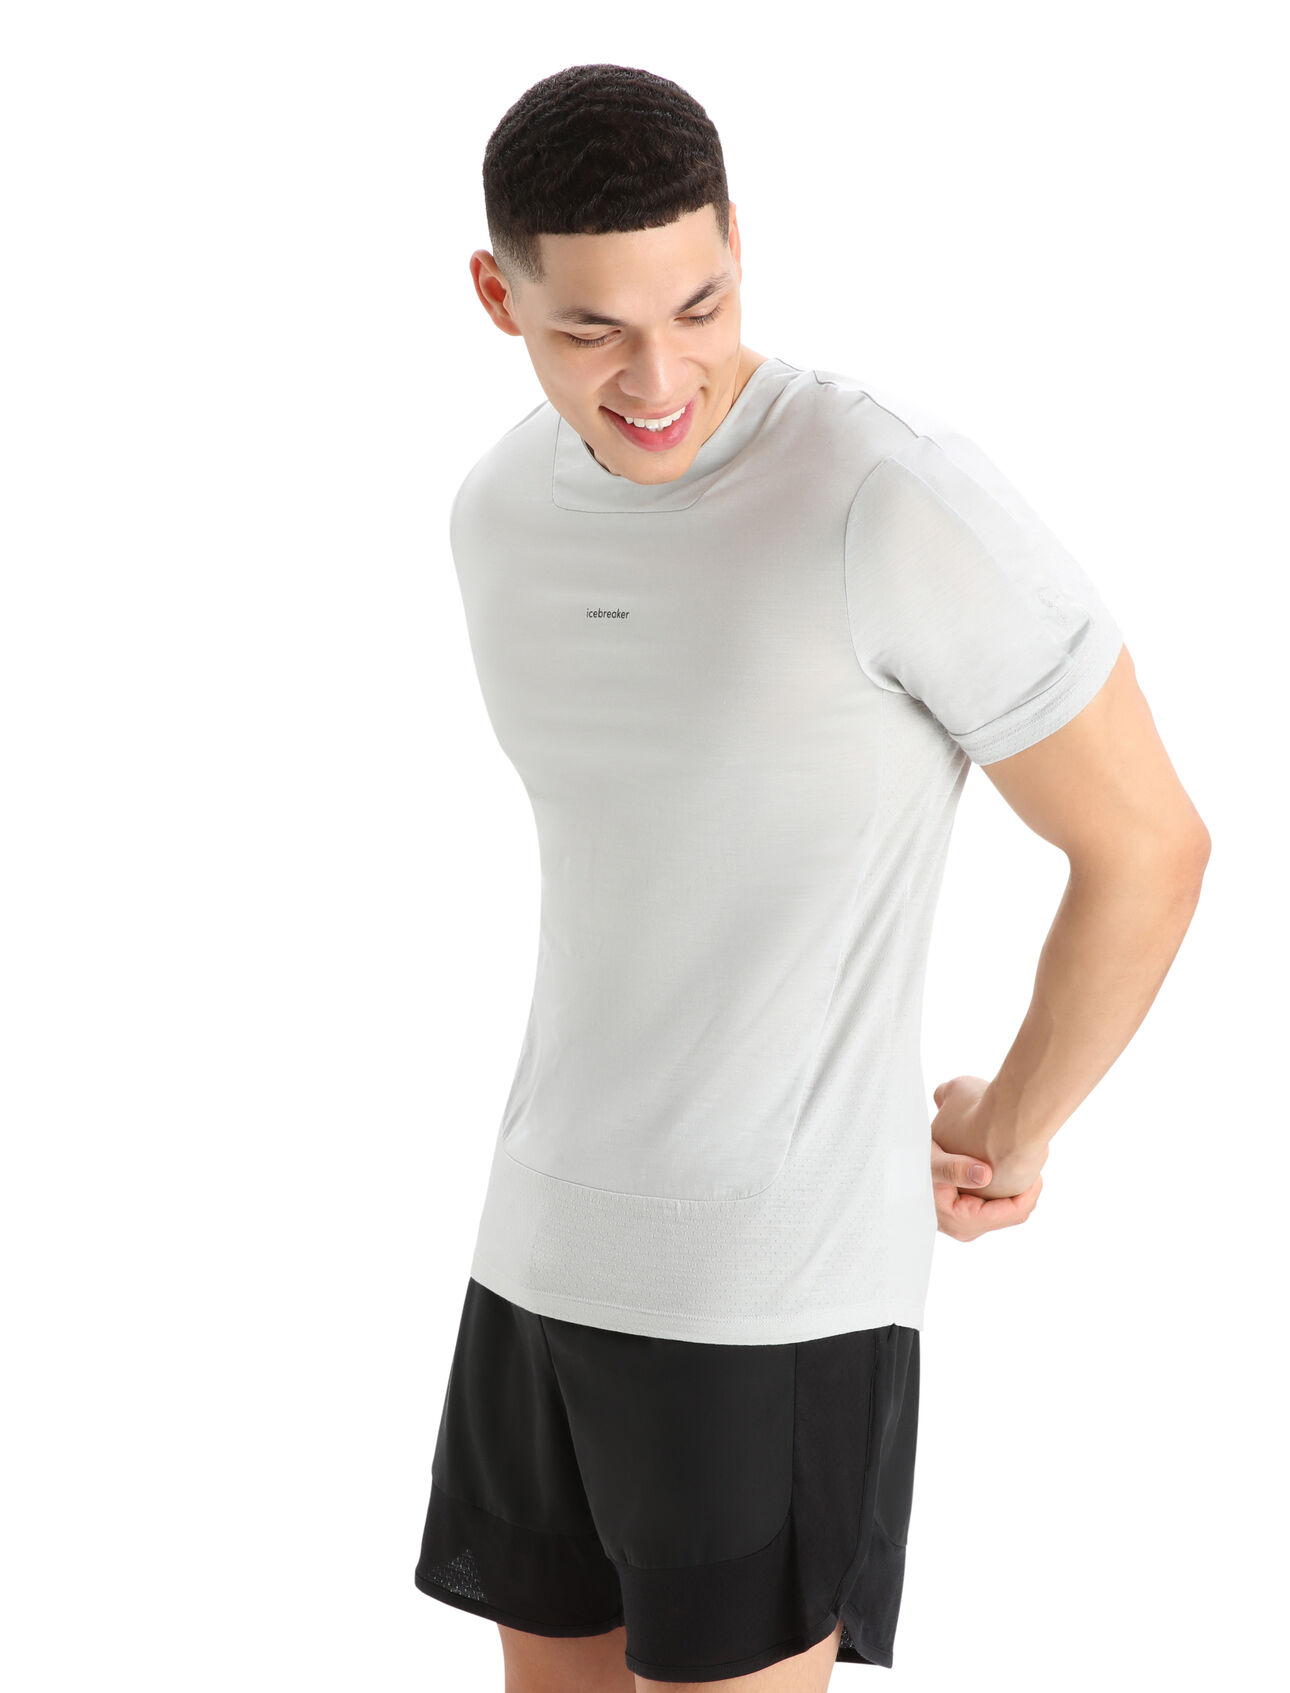 Mens ZoneKnit™ Merino Short Sleeve T-Shirt Our most breathable and lightweight tee designed for running, biking and other high exertion pursuits, the ZoneKnit™ Short Sleeve Tee combines our Cool-Lite™ jersey fabric with strategic panels of eyelet mesh for enhanced airflow.